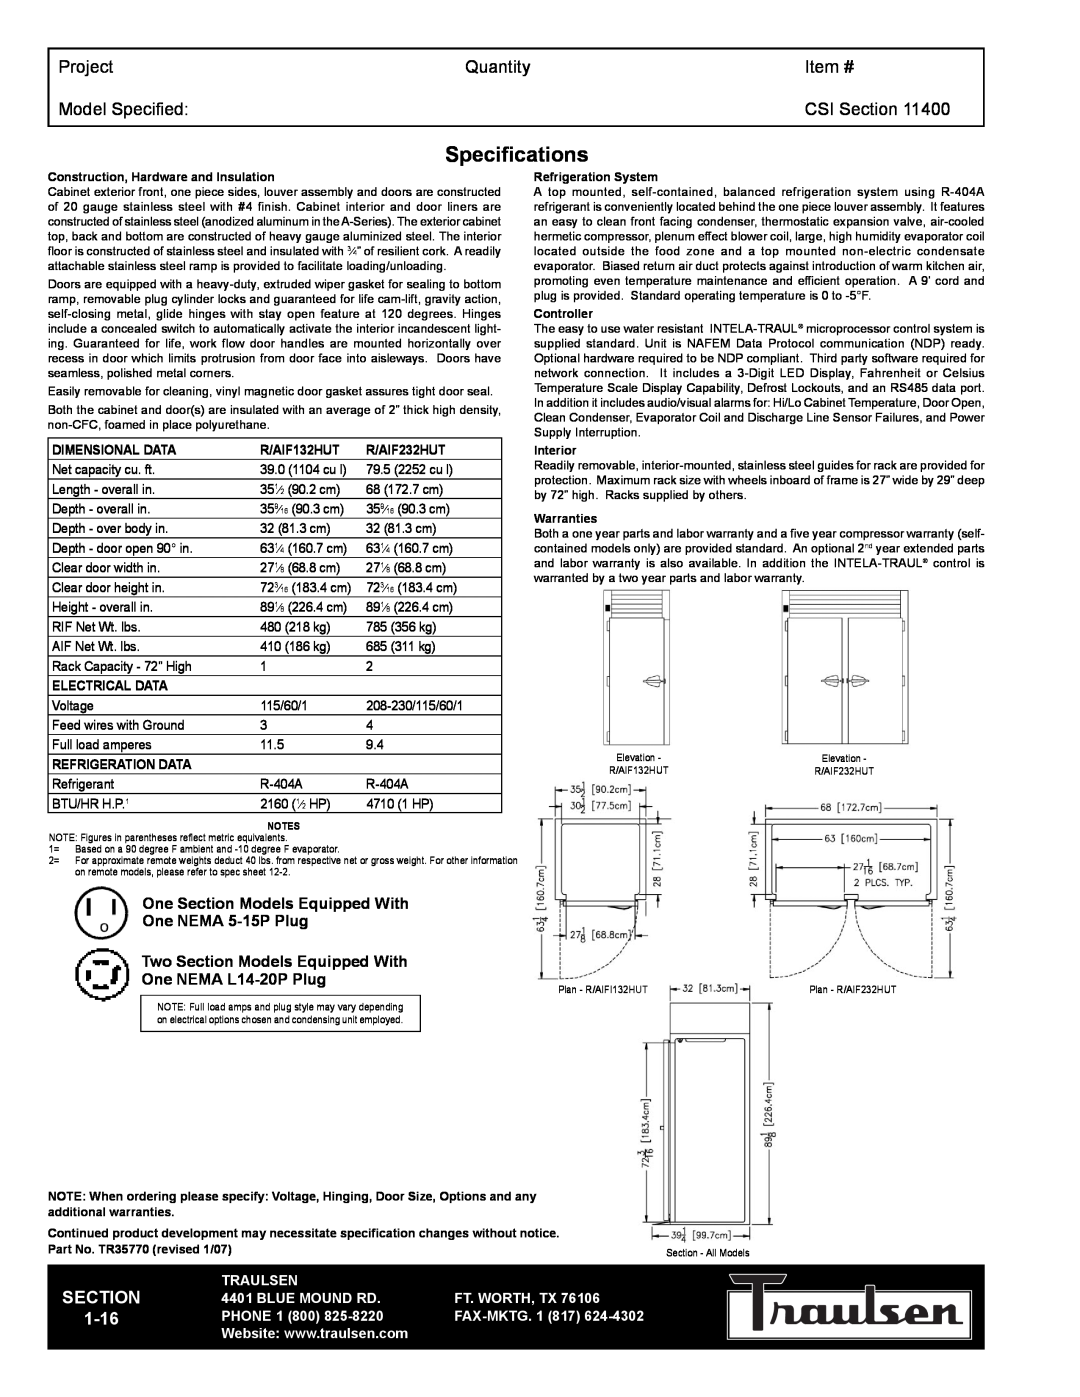 Traulsen AIF132HUT-FHS Specifications, Project, Quantity, Item #, Model Specified, CSI Section, 1-16, One NEMA 5-15PPlug 